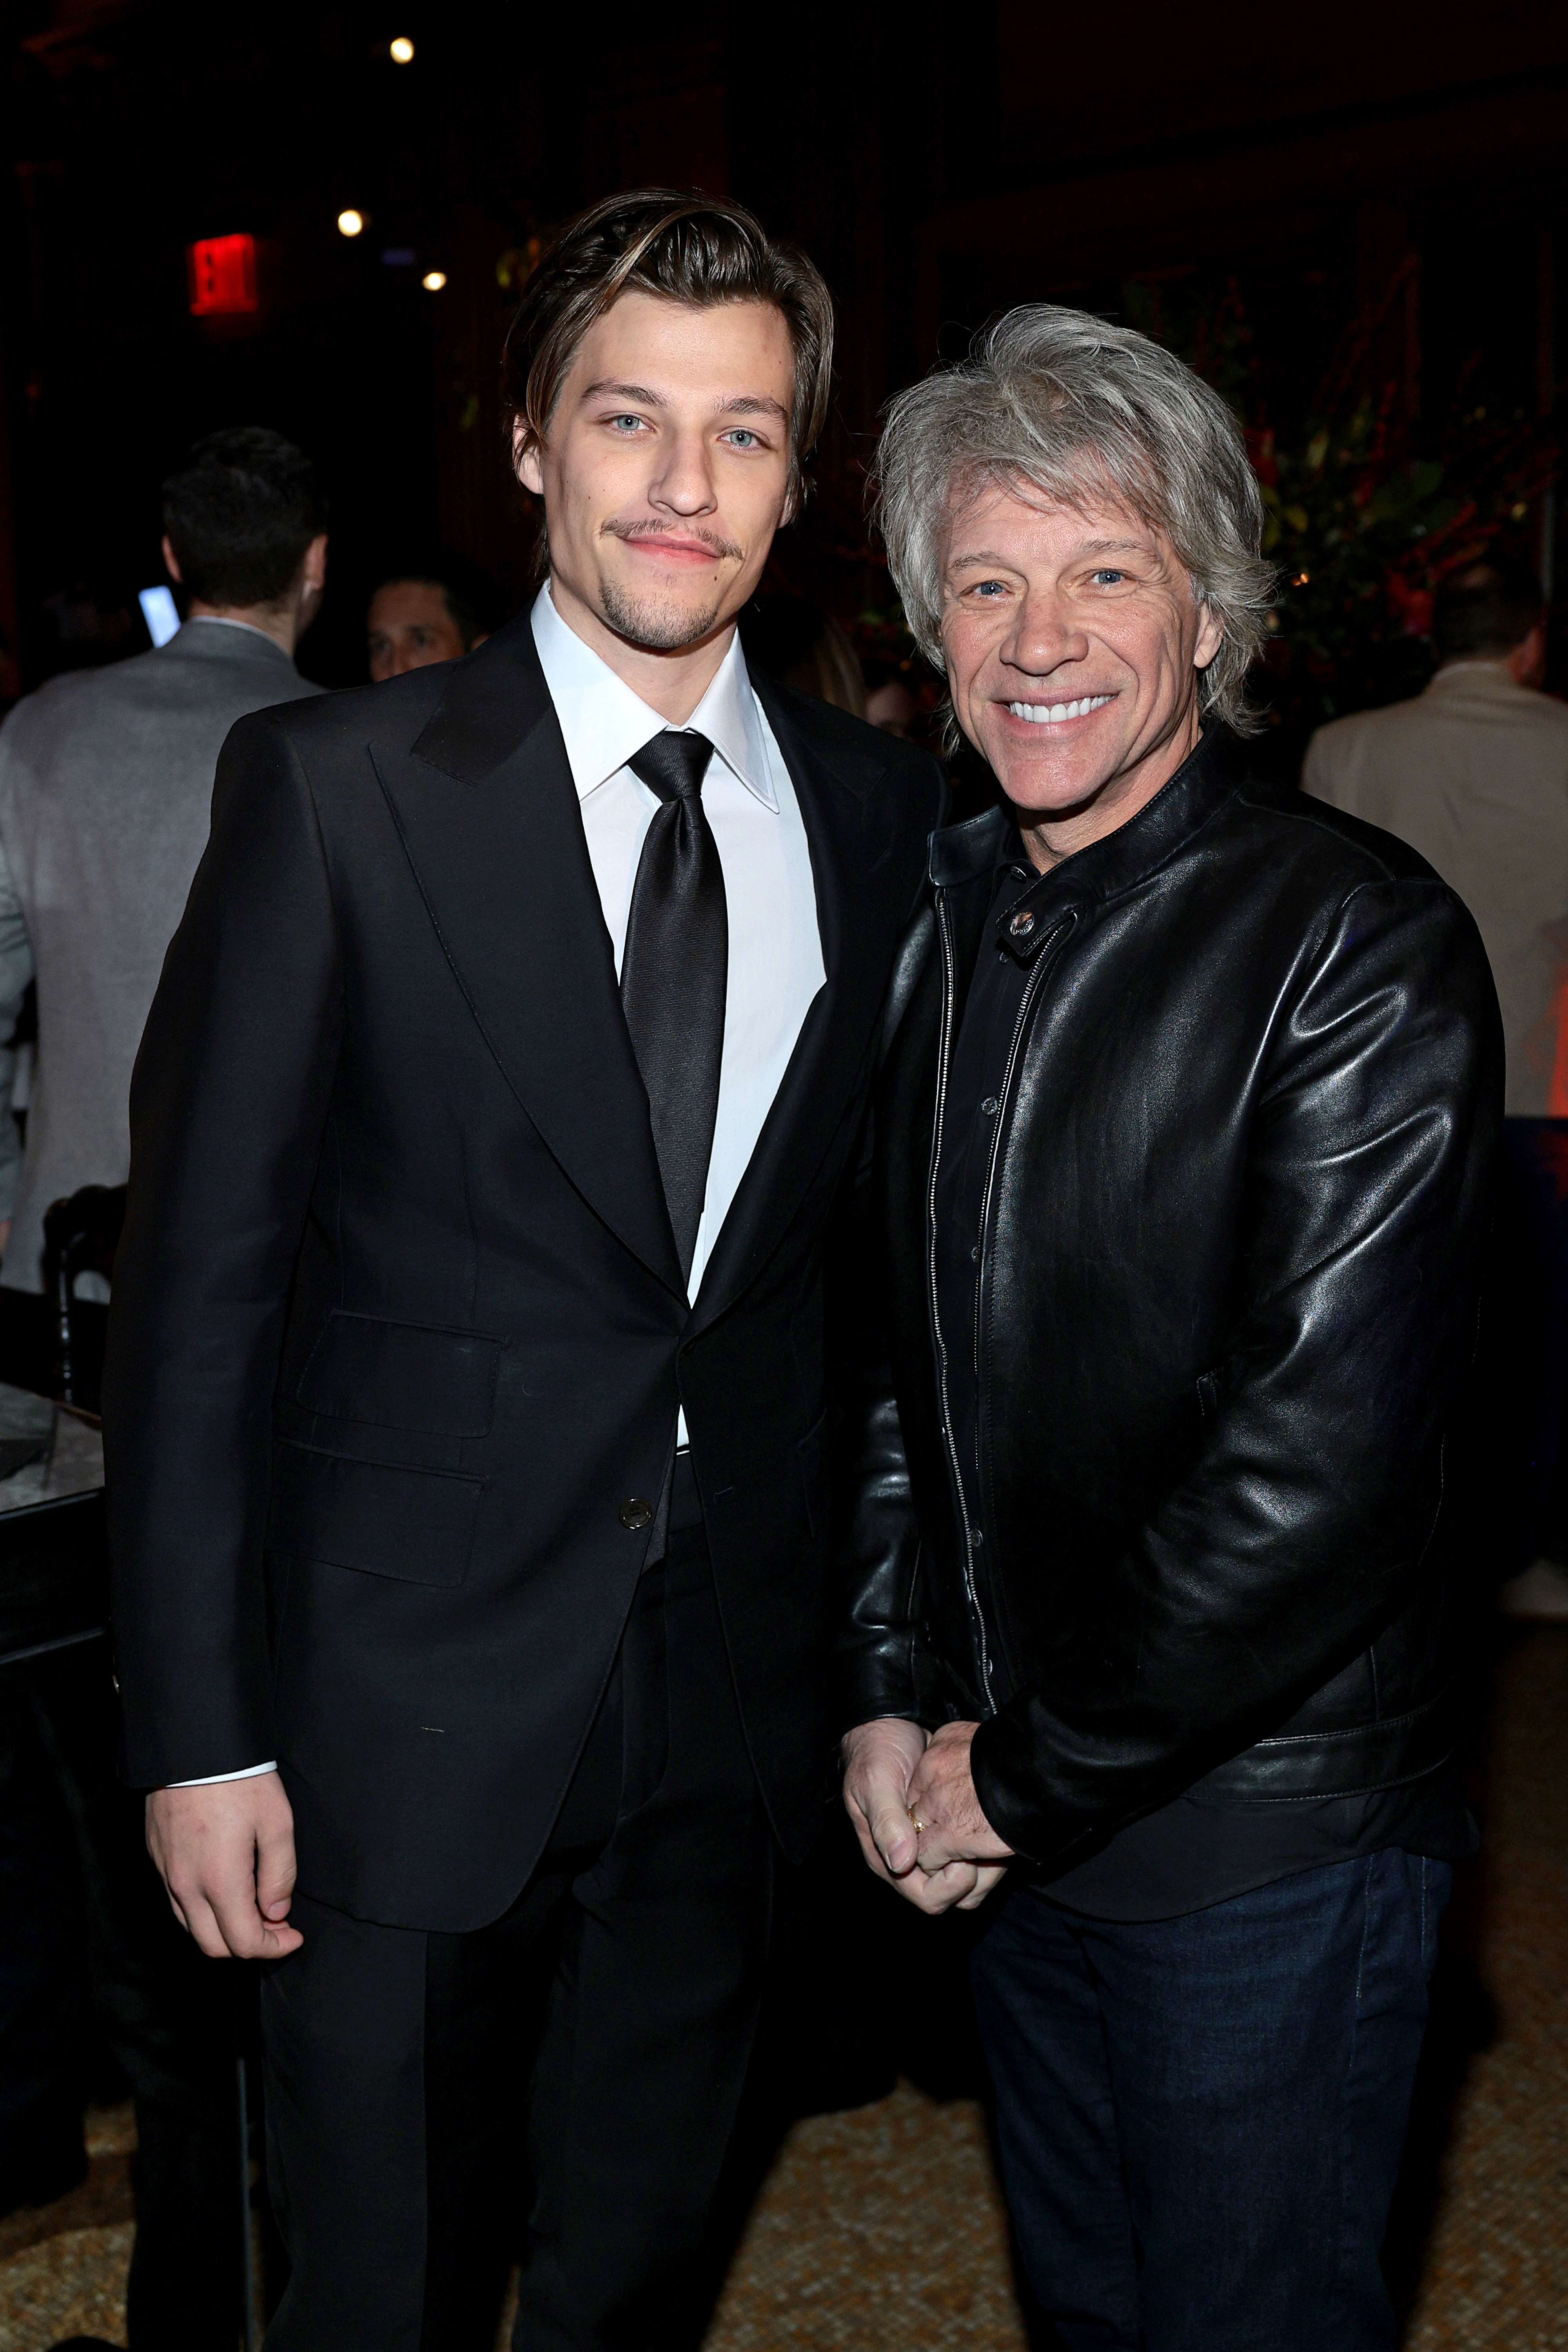 Jake Bongiovi and Jon Bon Jovi at the premiere of "Damsel" in New York City on March 1, 2024 | Source: Getty Images